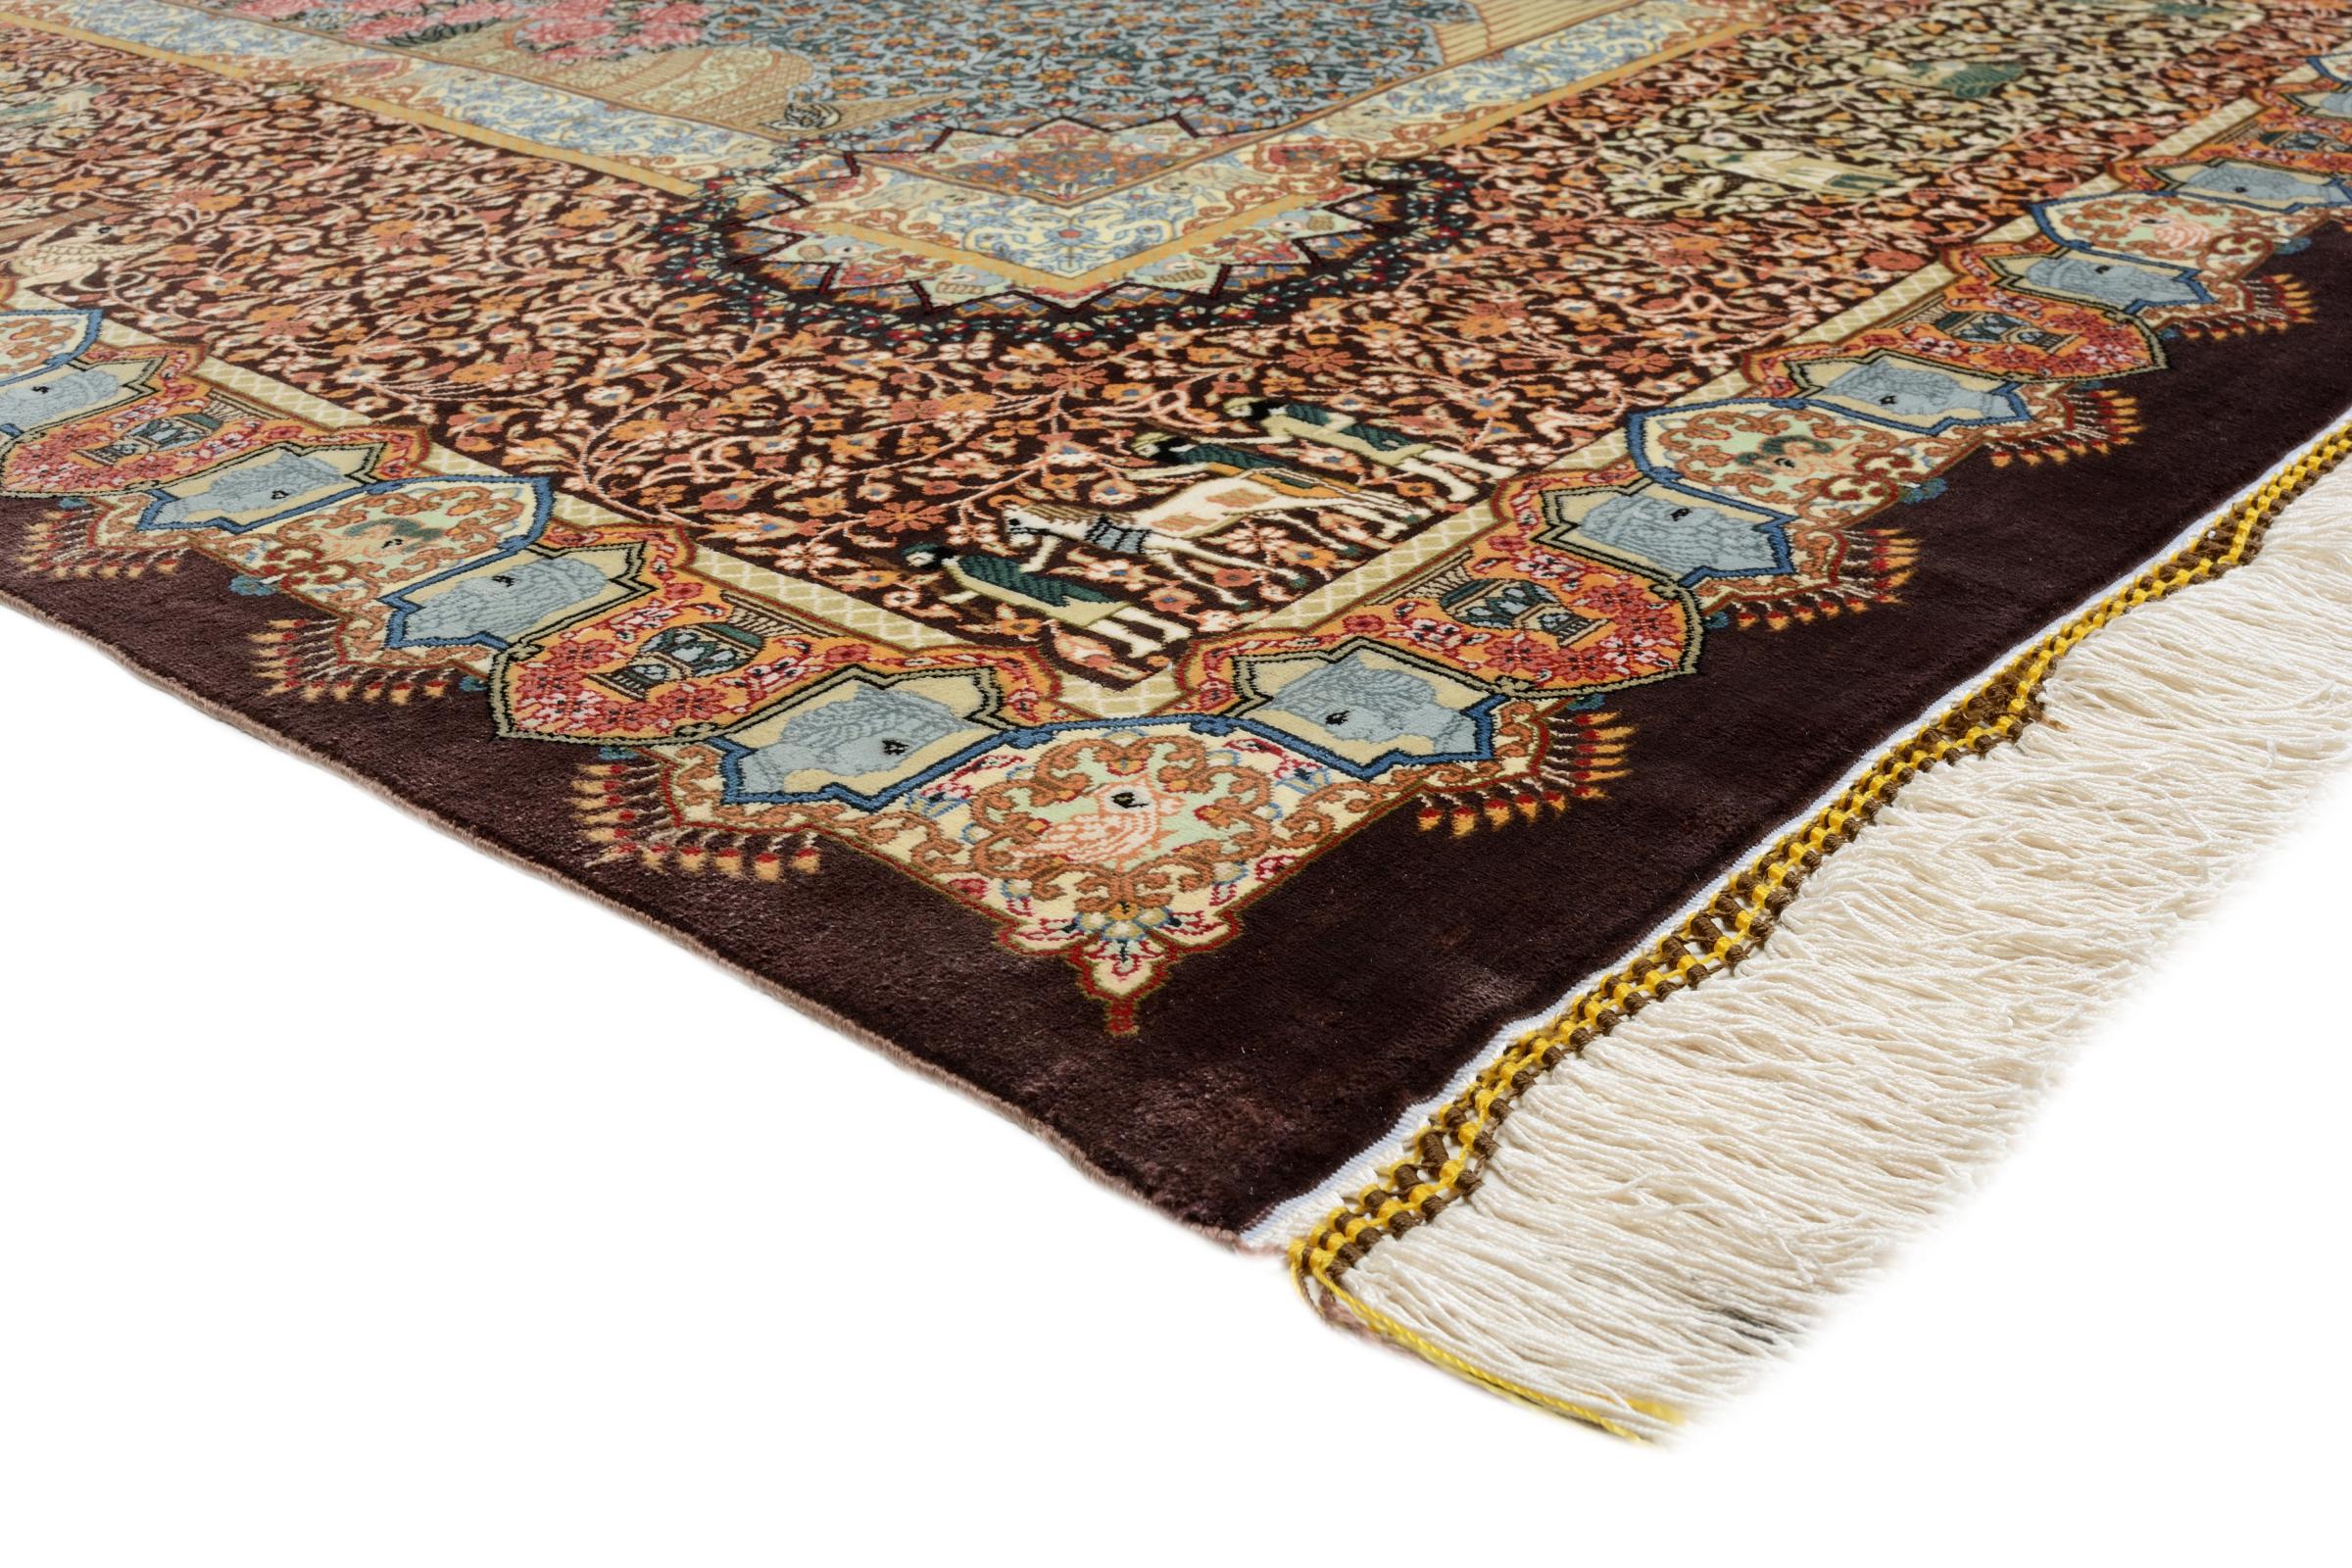 How to Tell If a Rug Is Handmade or Machine Made